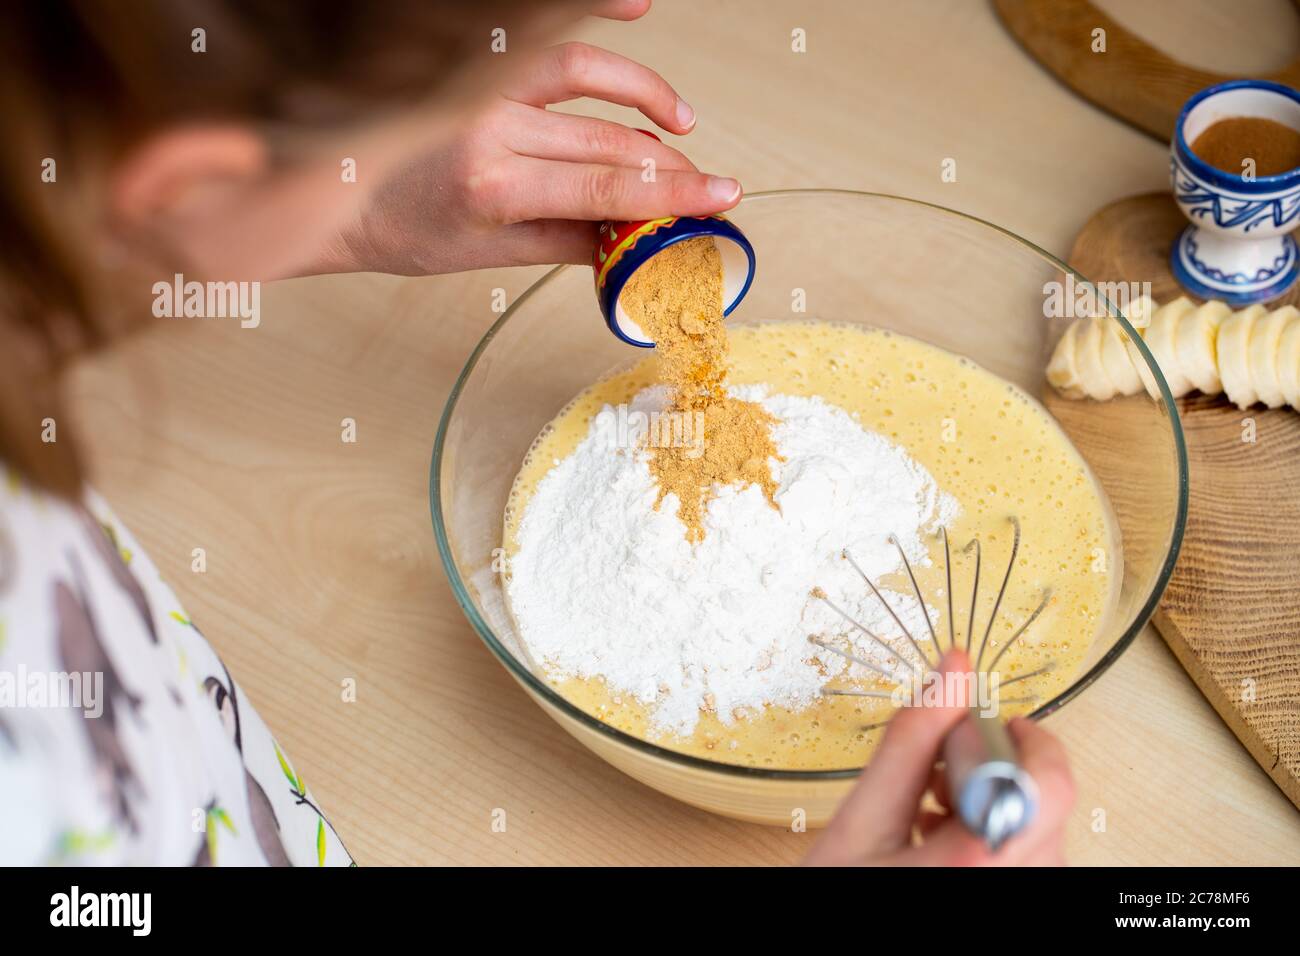 Young girl is adding spices and flour to blended bananas. Preparing easy to make and healthy, home made banana bread. Stock Photo